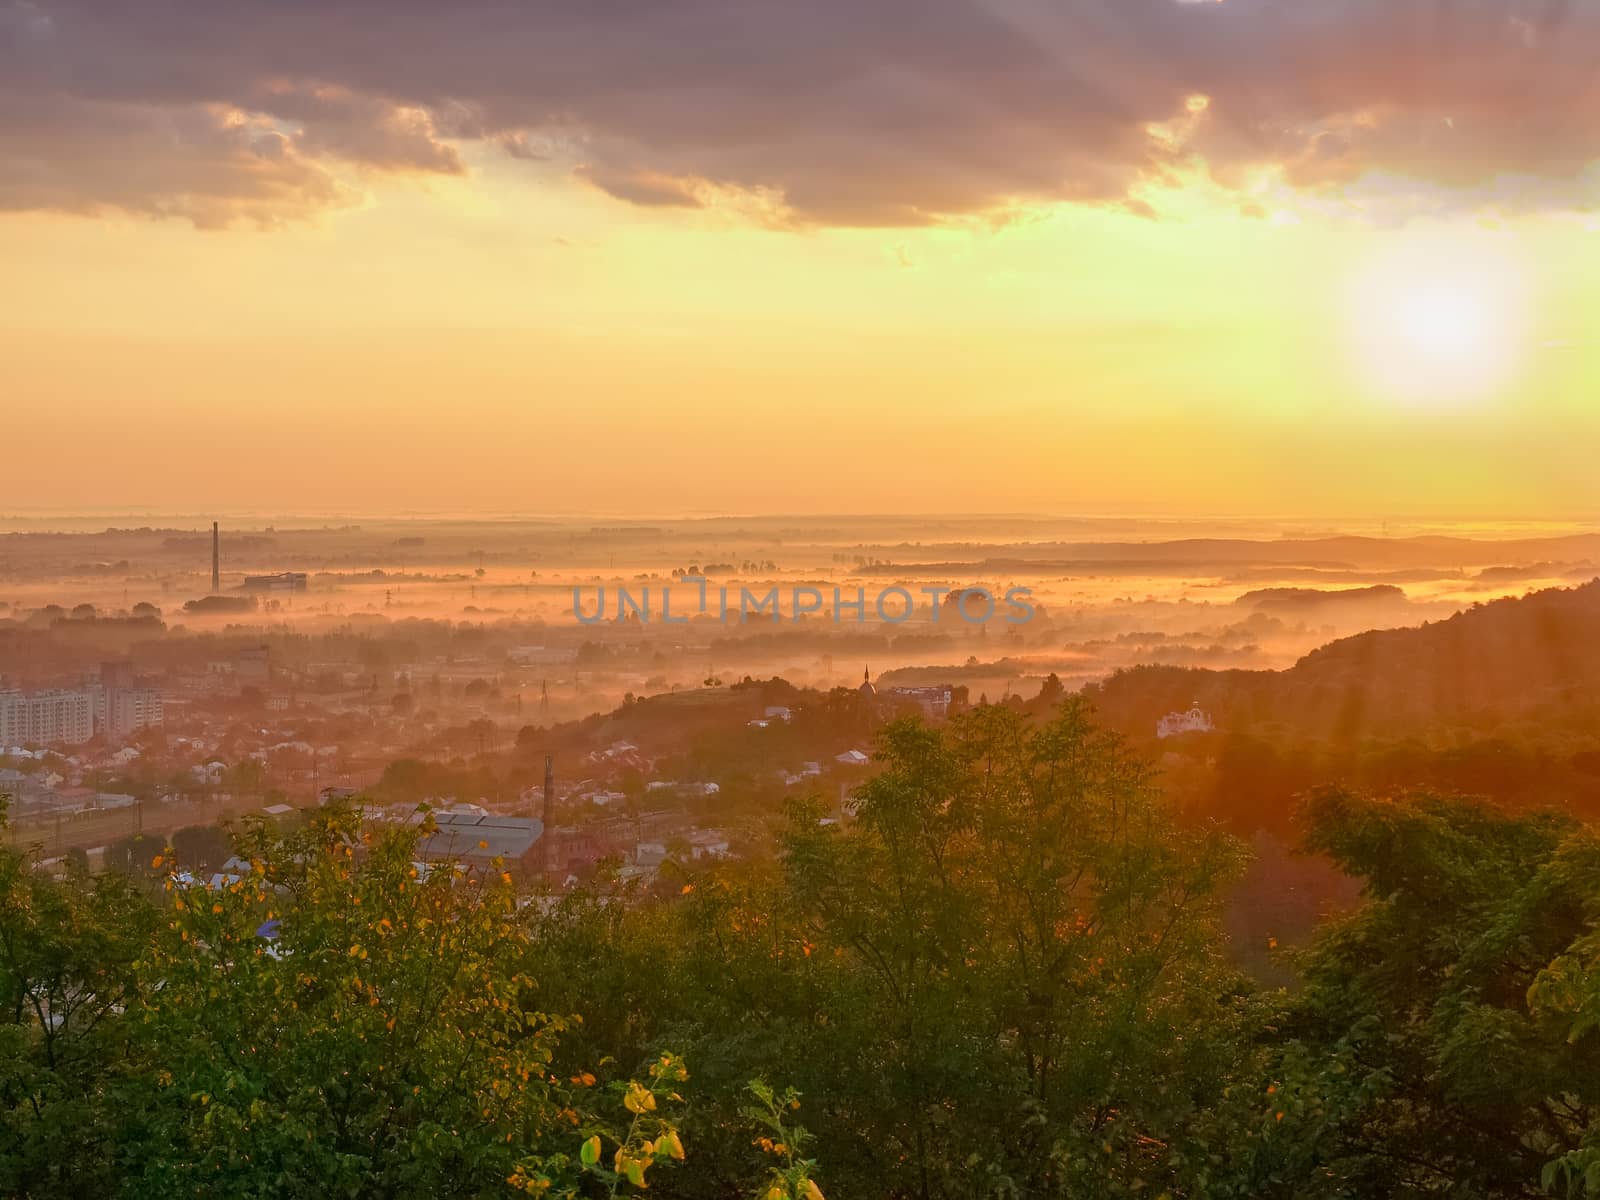 View of the outskirts of the city from hill during sunrise
